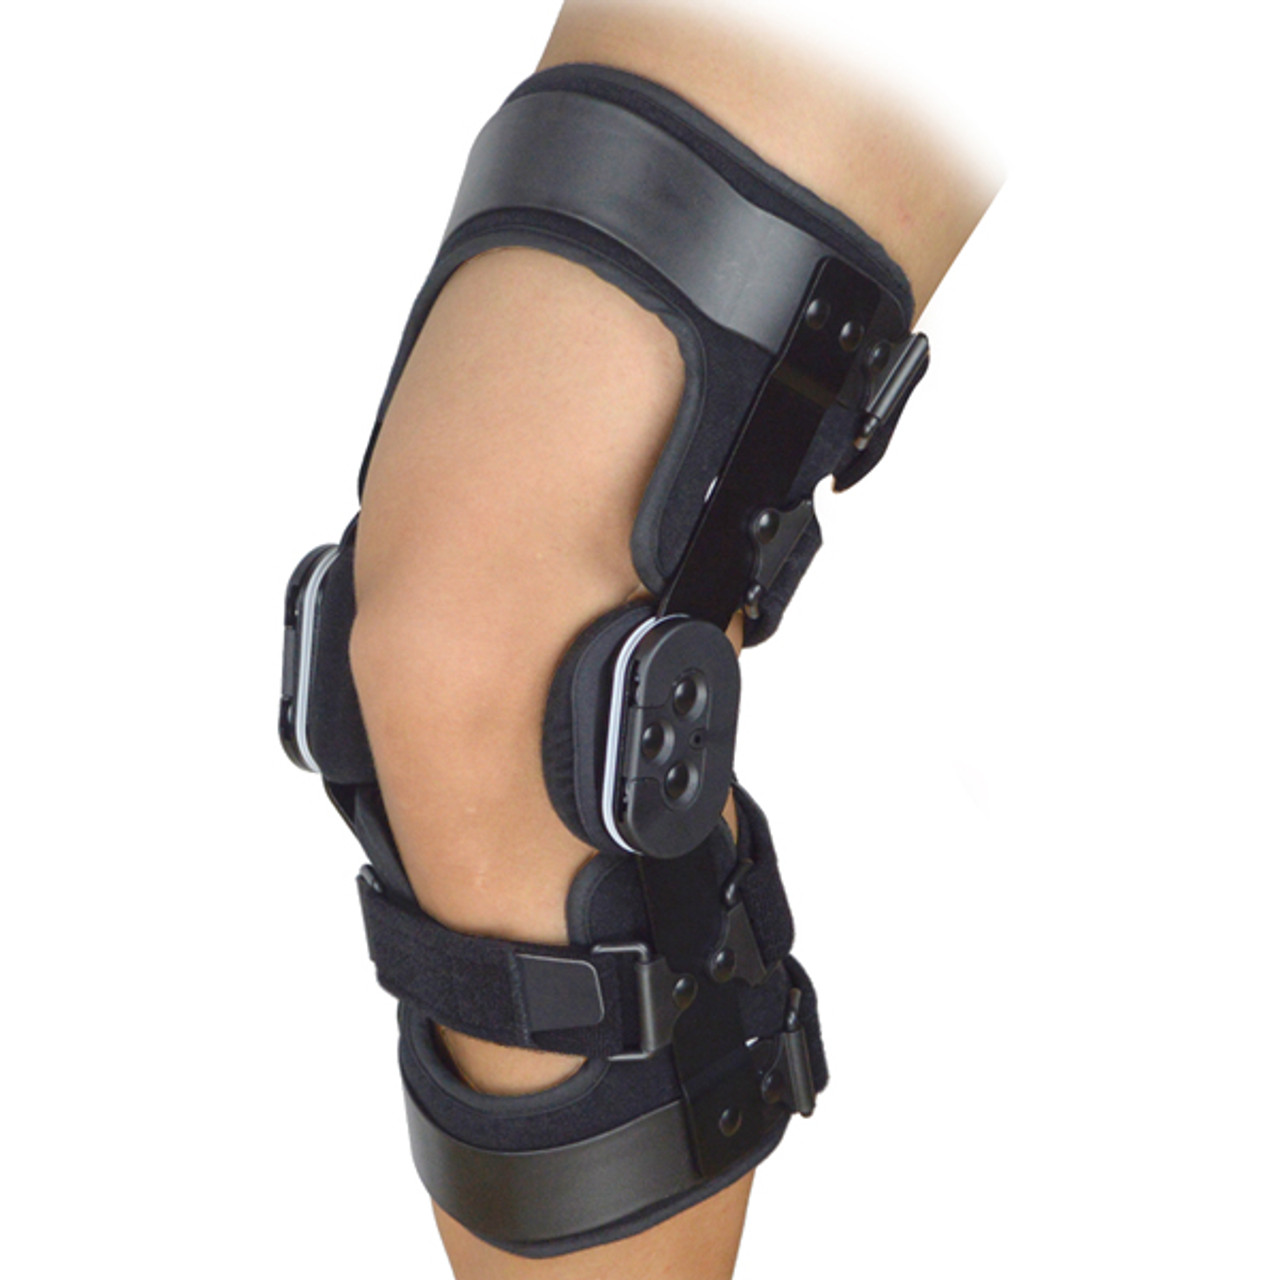 Orthoactive 5439 ACL/PCL Rigid Functional Knee Brace with ROM XLarge